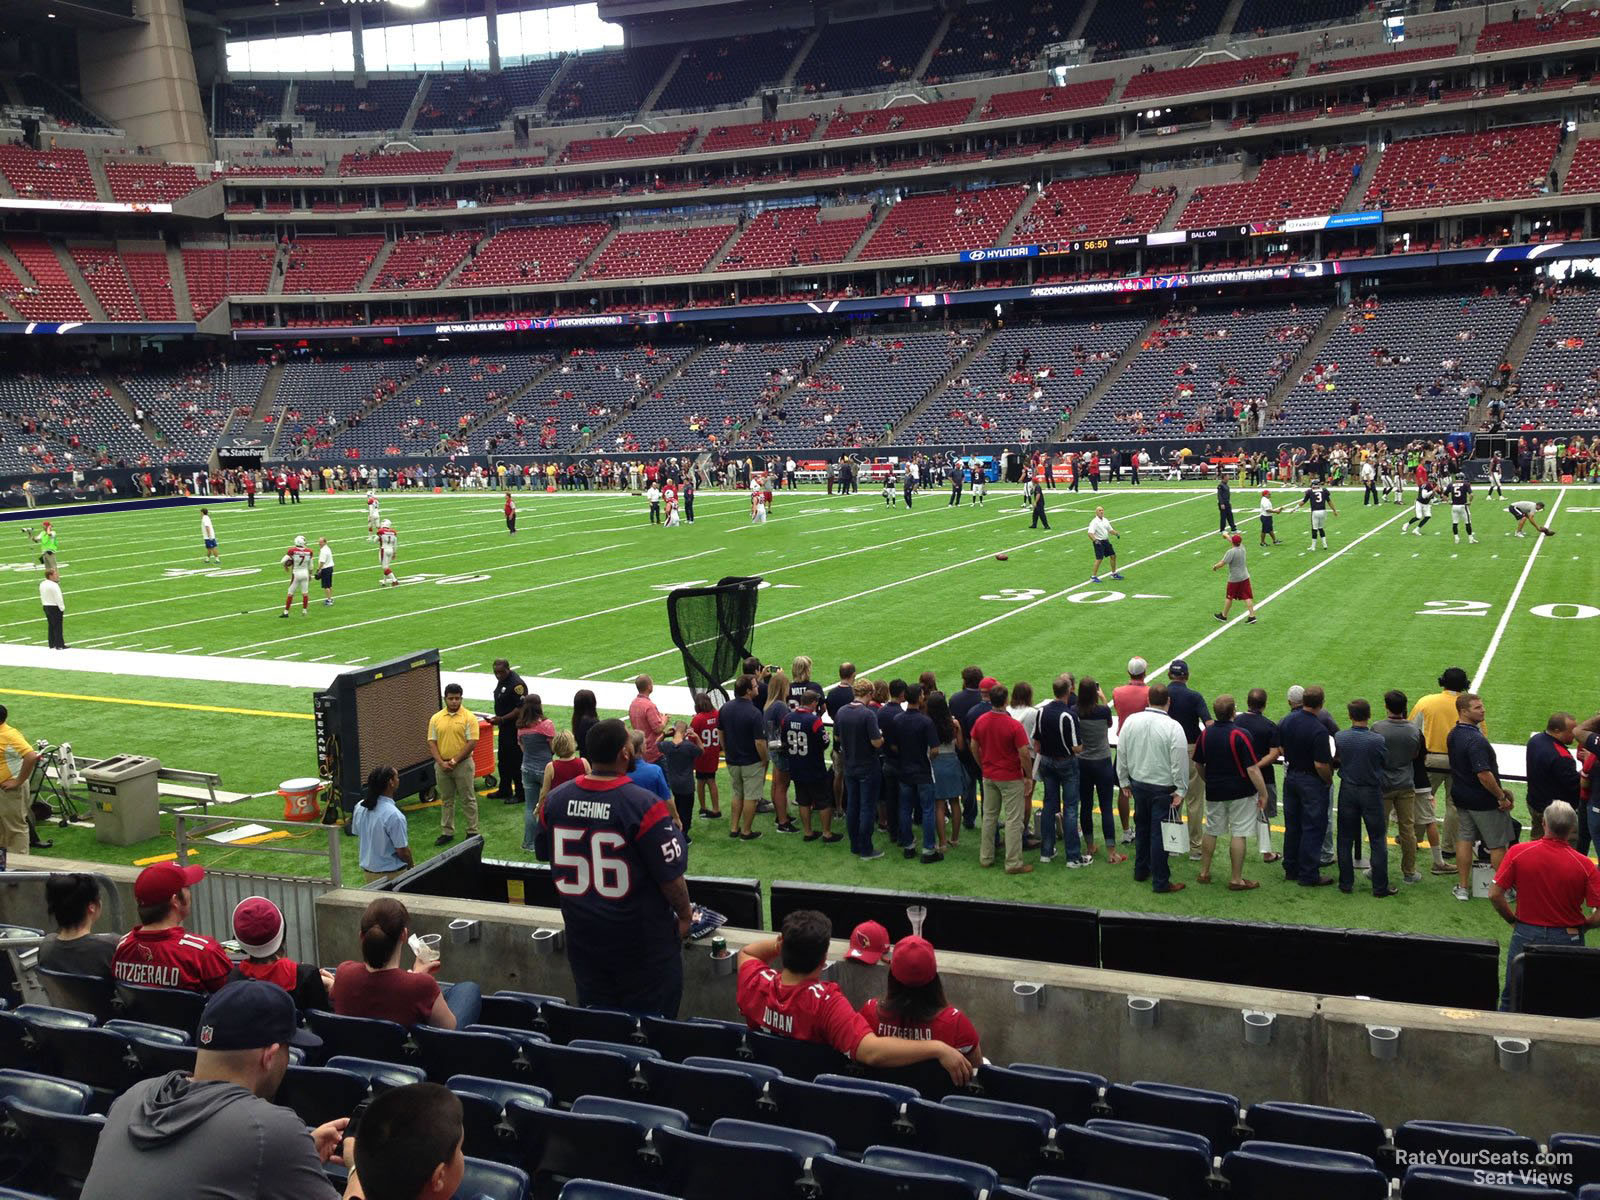 section 124, row c seat view  for football - nrg stadium